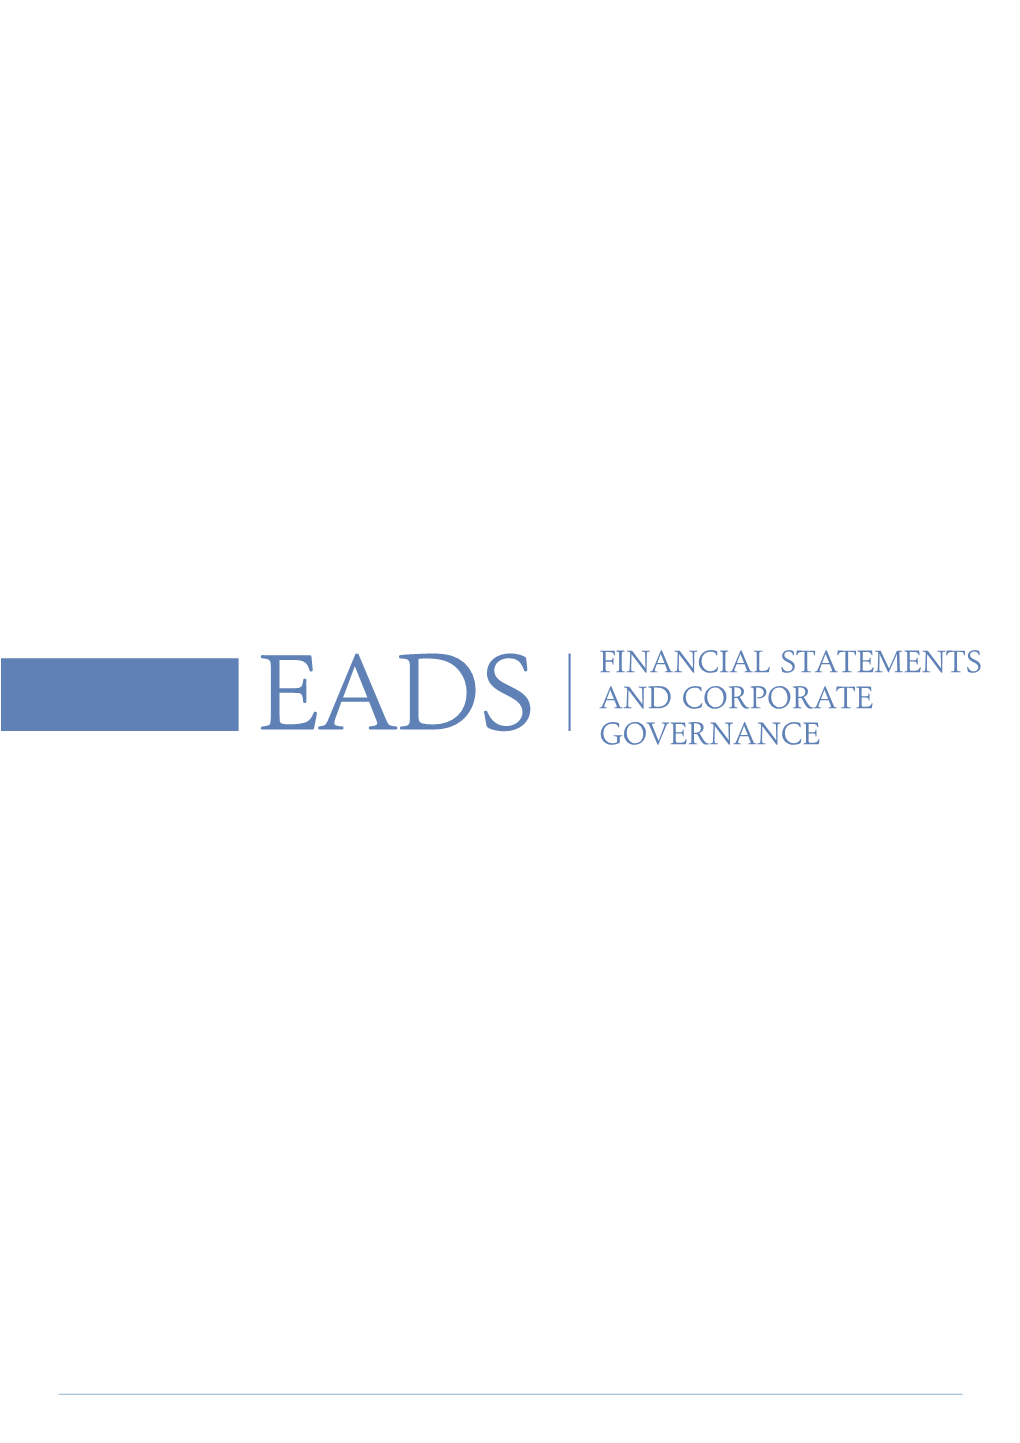 EADS Financial Statements and Corporate Governance Financial Statements and Corporate Governance Registration Document - Part 1